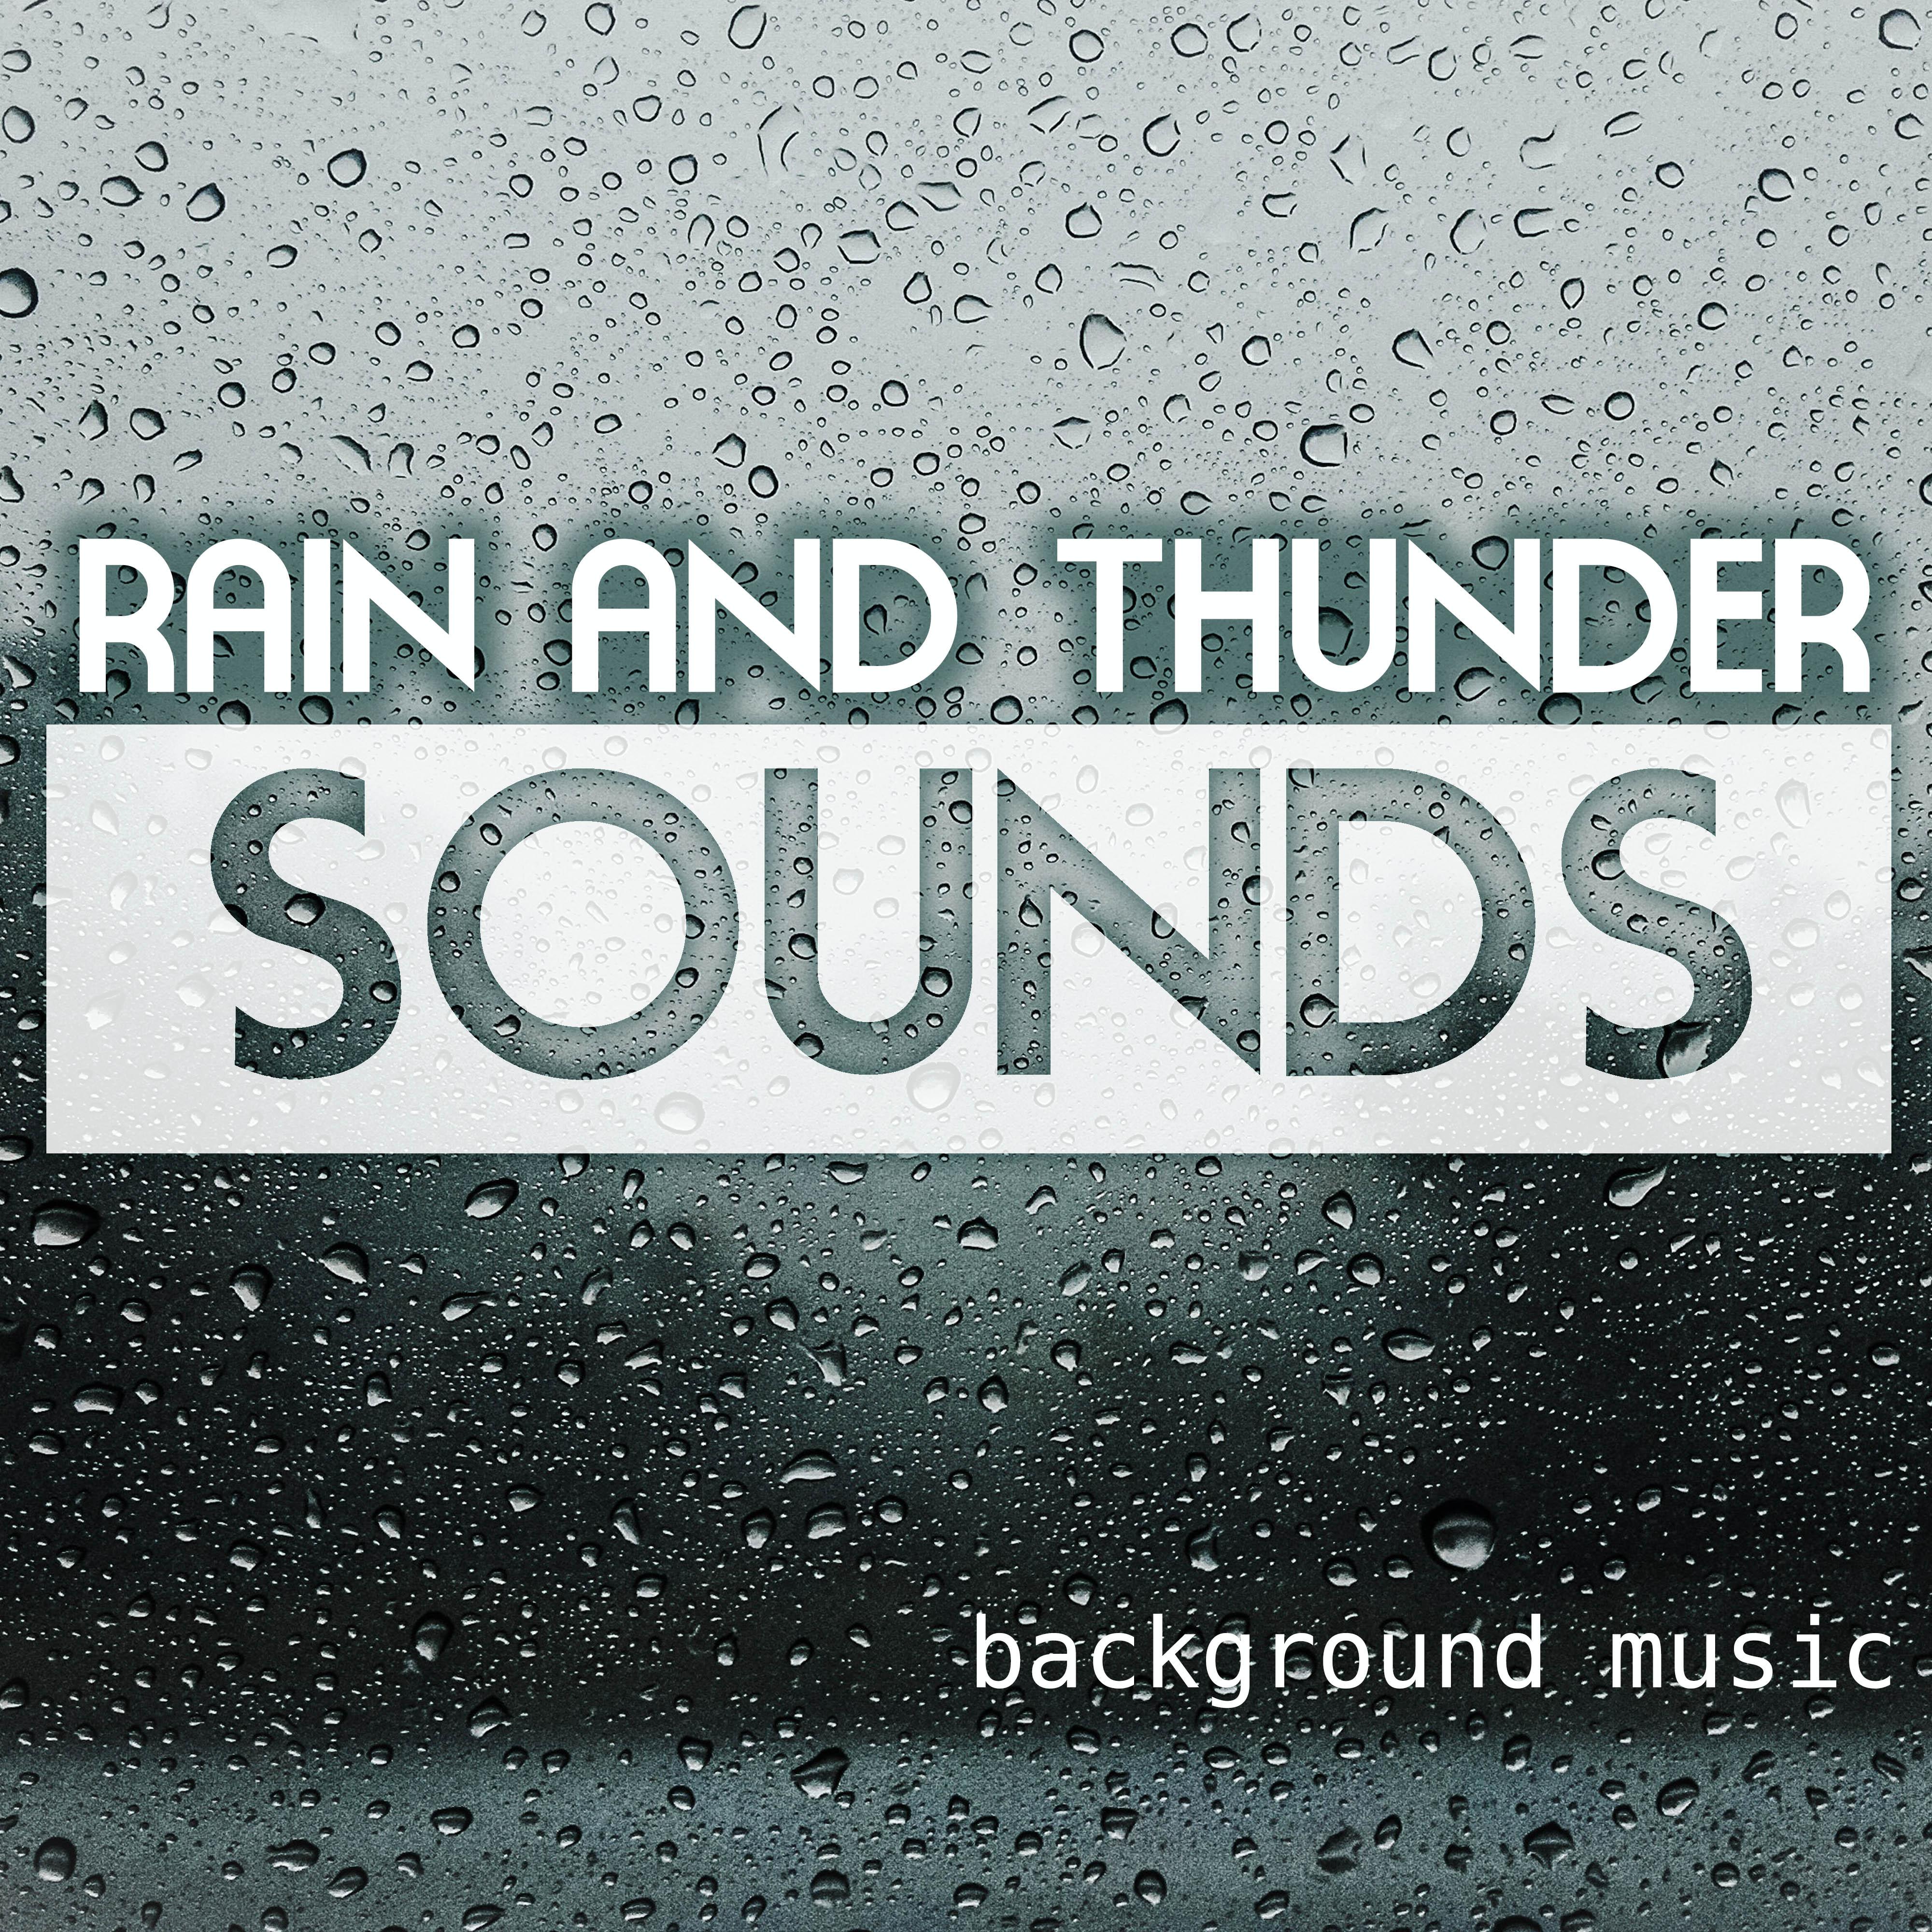 Rain and Thunder Sounds - Sleep & Relax Nature Sounds with Peaceful White Noise Background Music